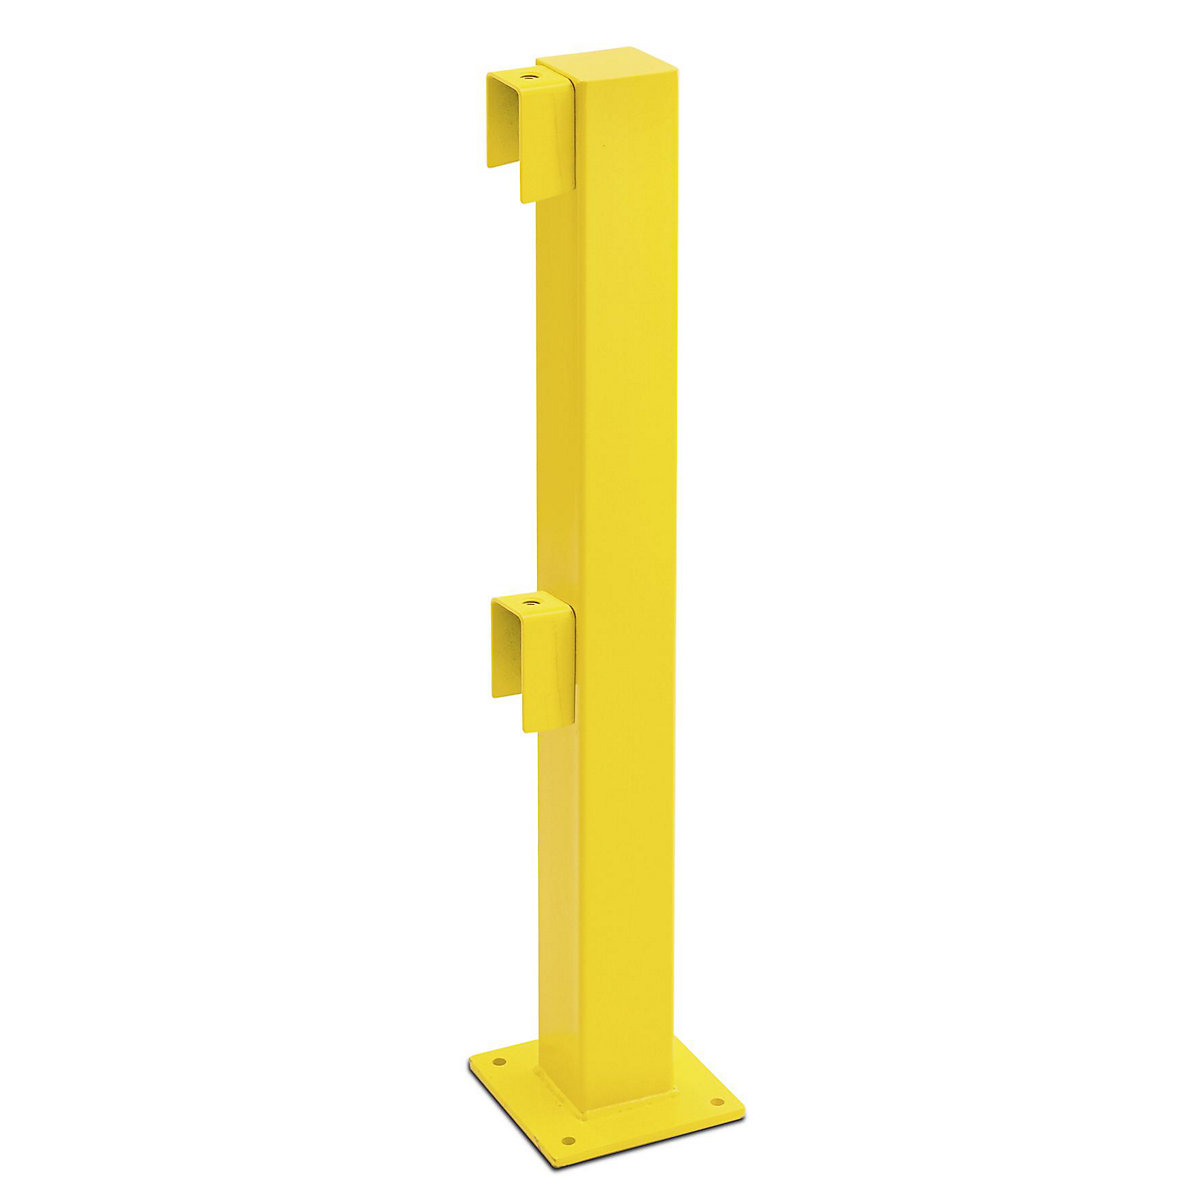 XL-Line post for safety railing